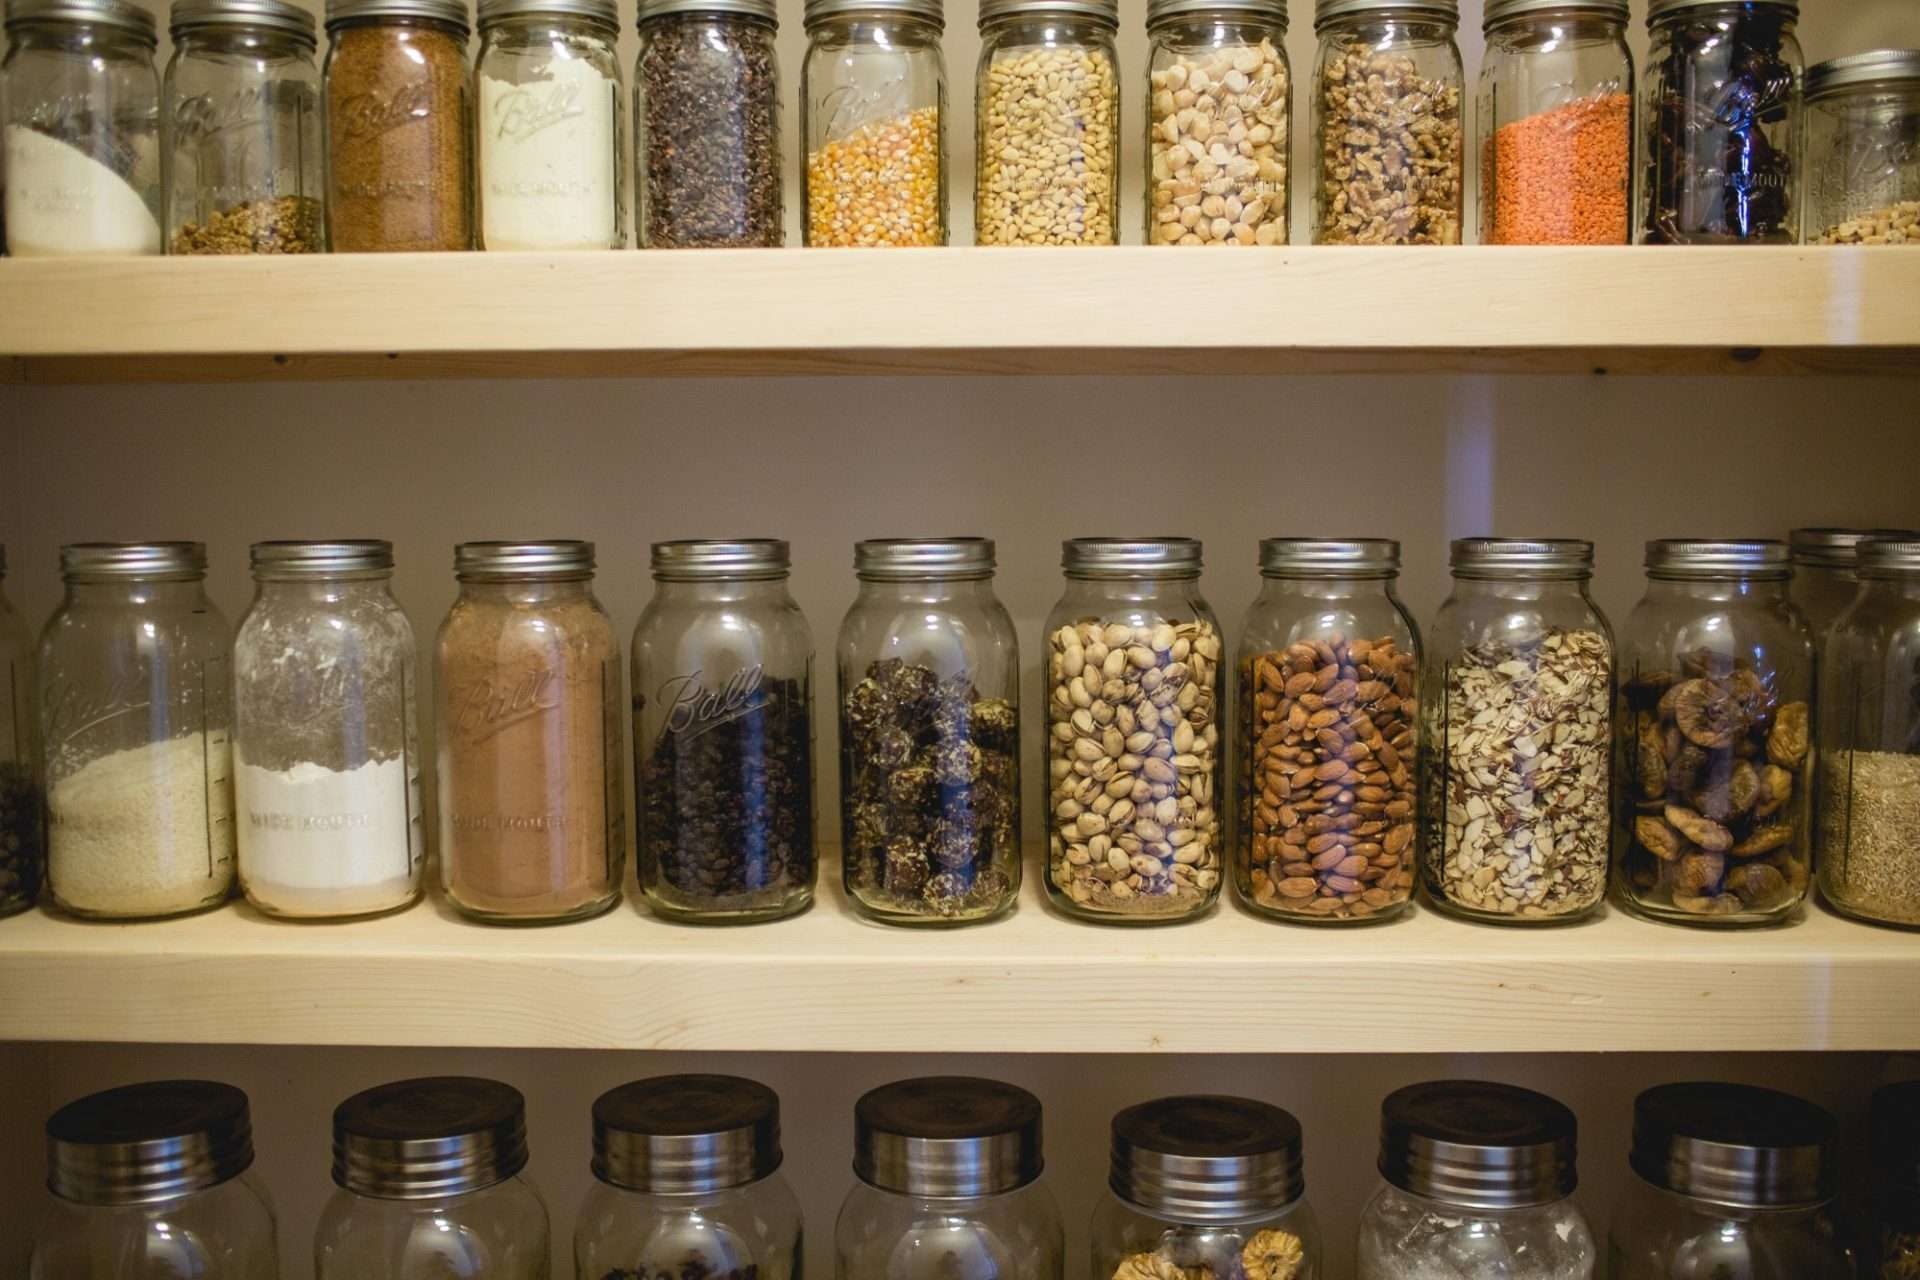 Pantry filled with just glass jars.